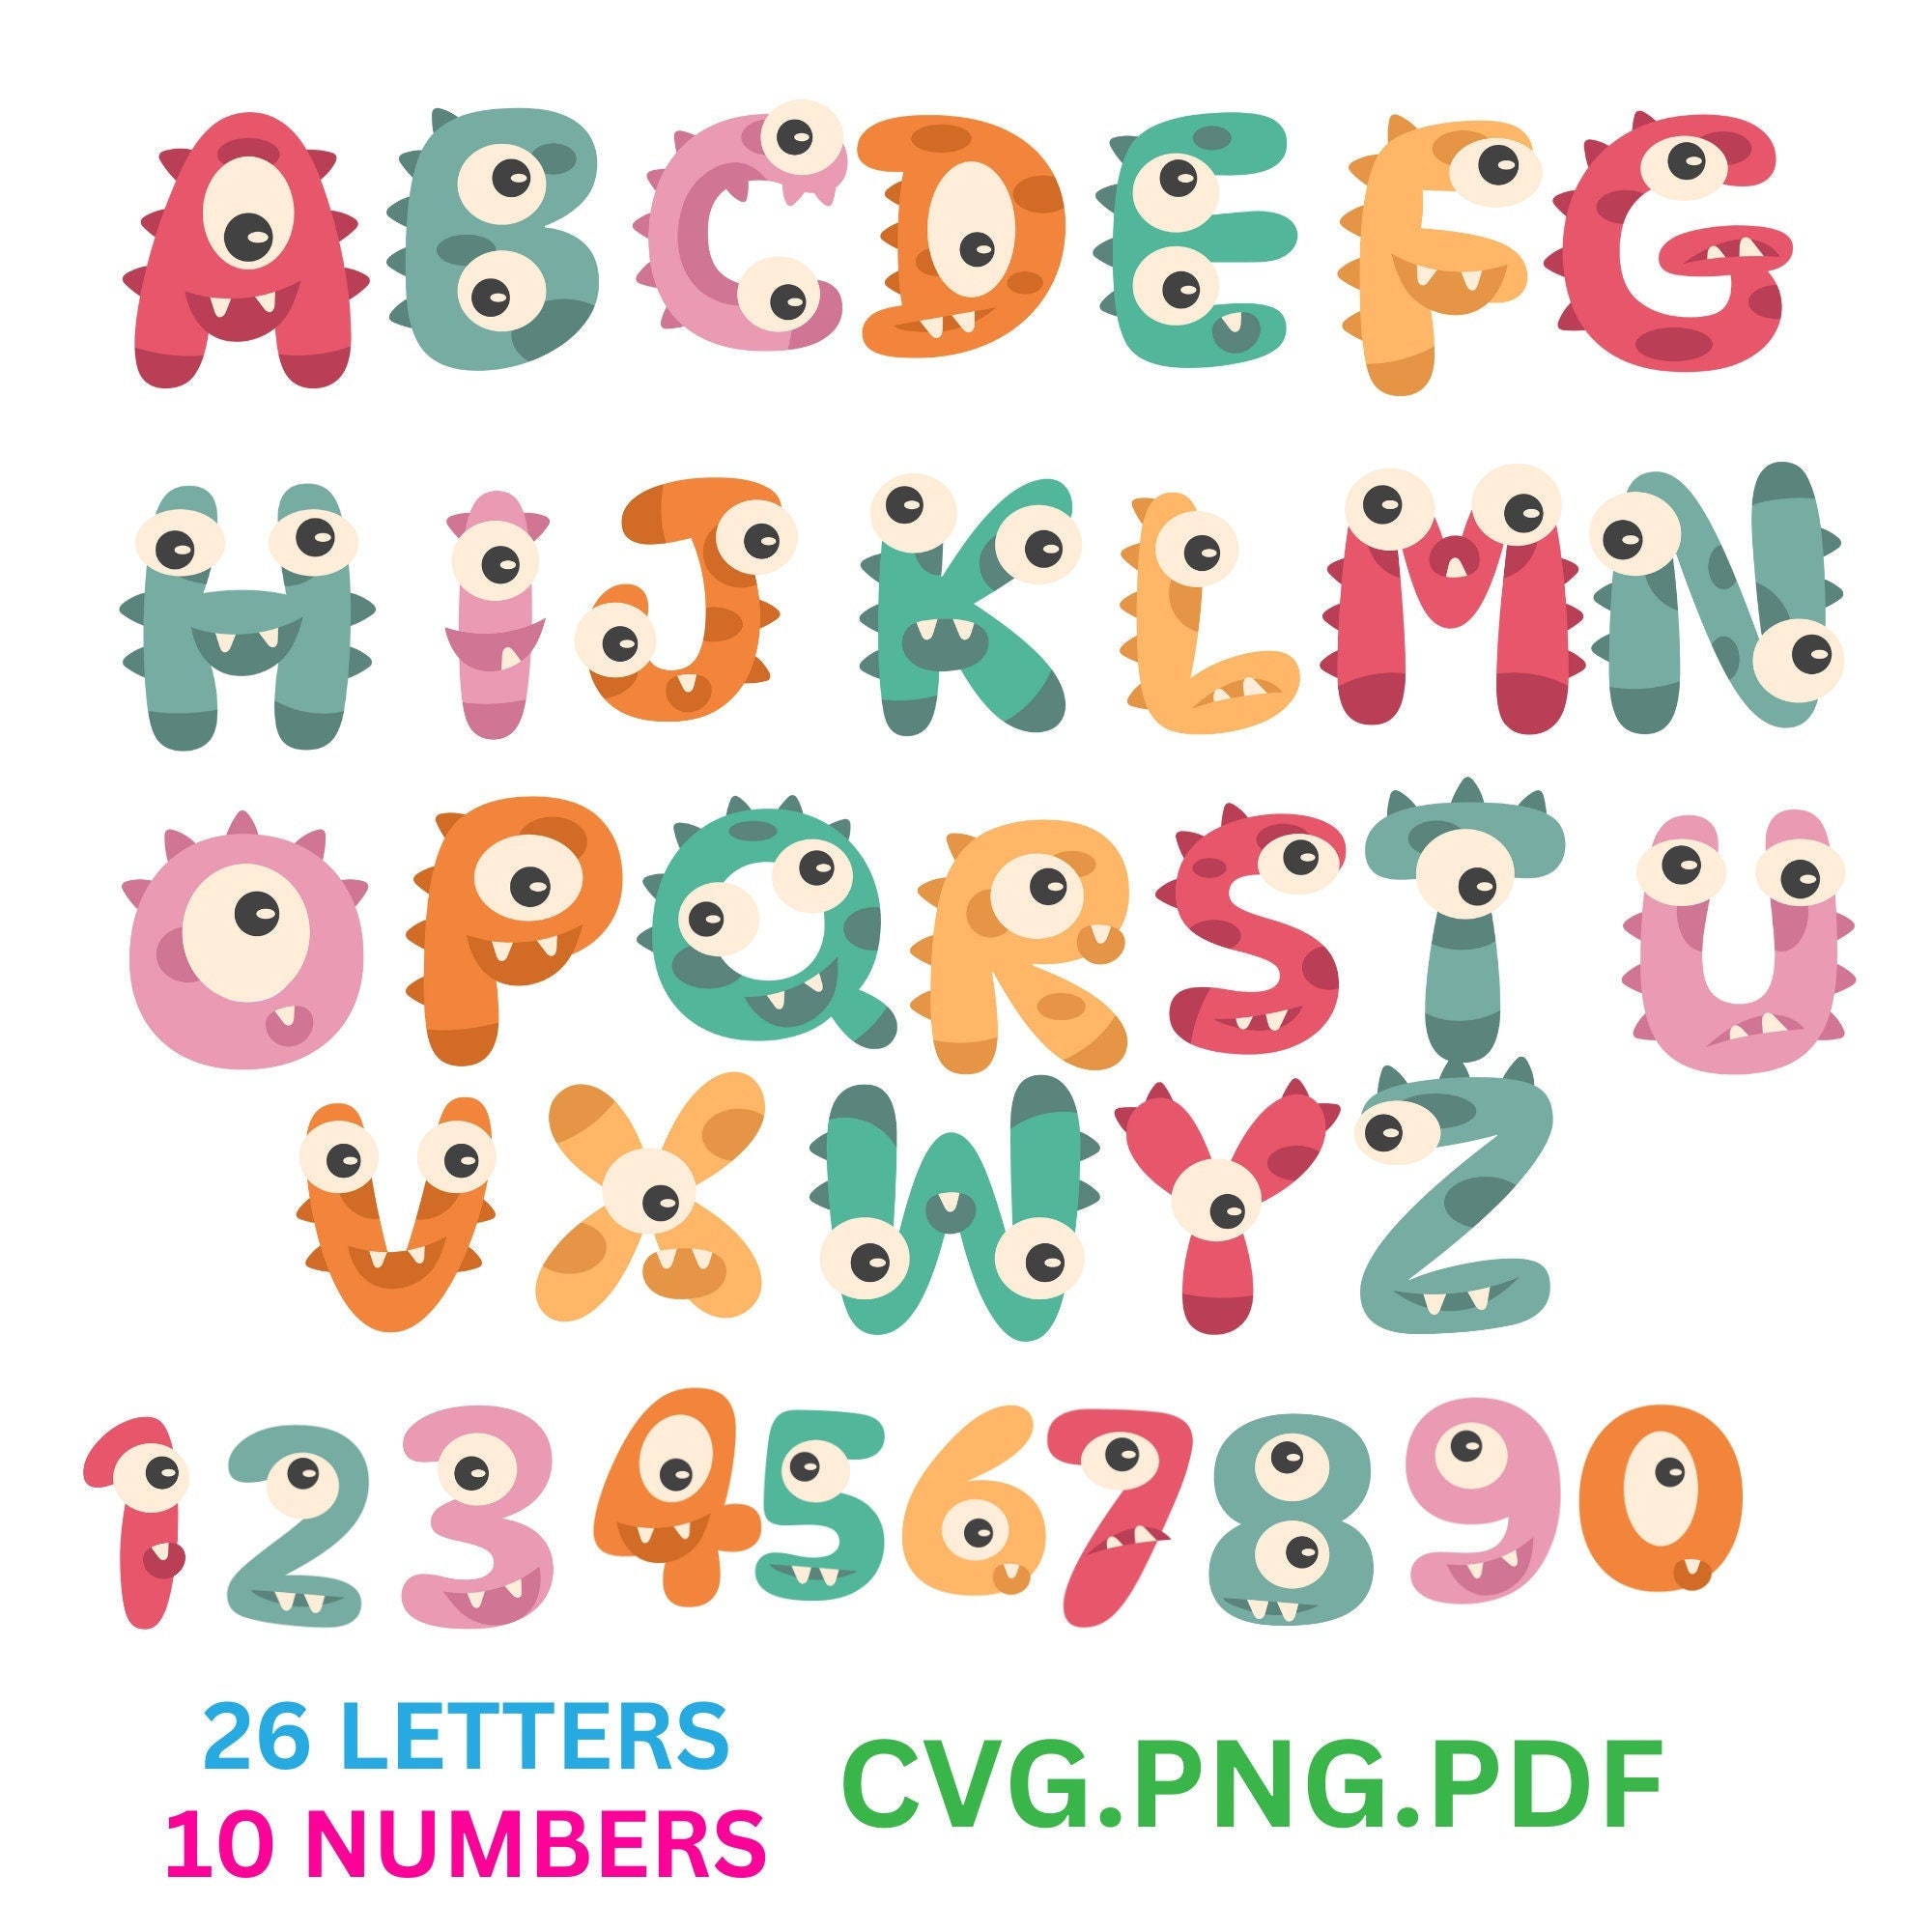 One Document Complete Alphabet Lore Bundle, Uppercase, Lowercase and Number  epssvgpngpdf, Blank and Colorful Alphabet Lore, Digital Alph -  in 2023